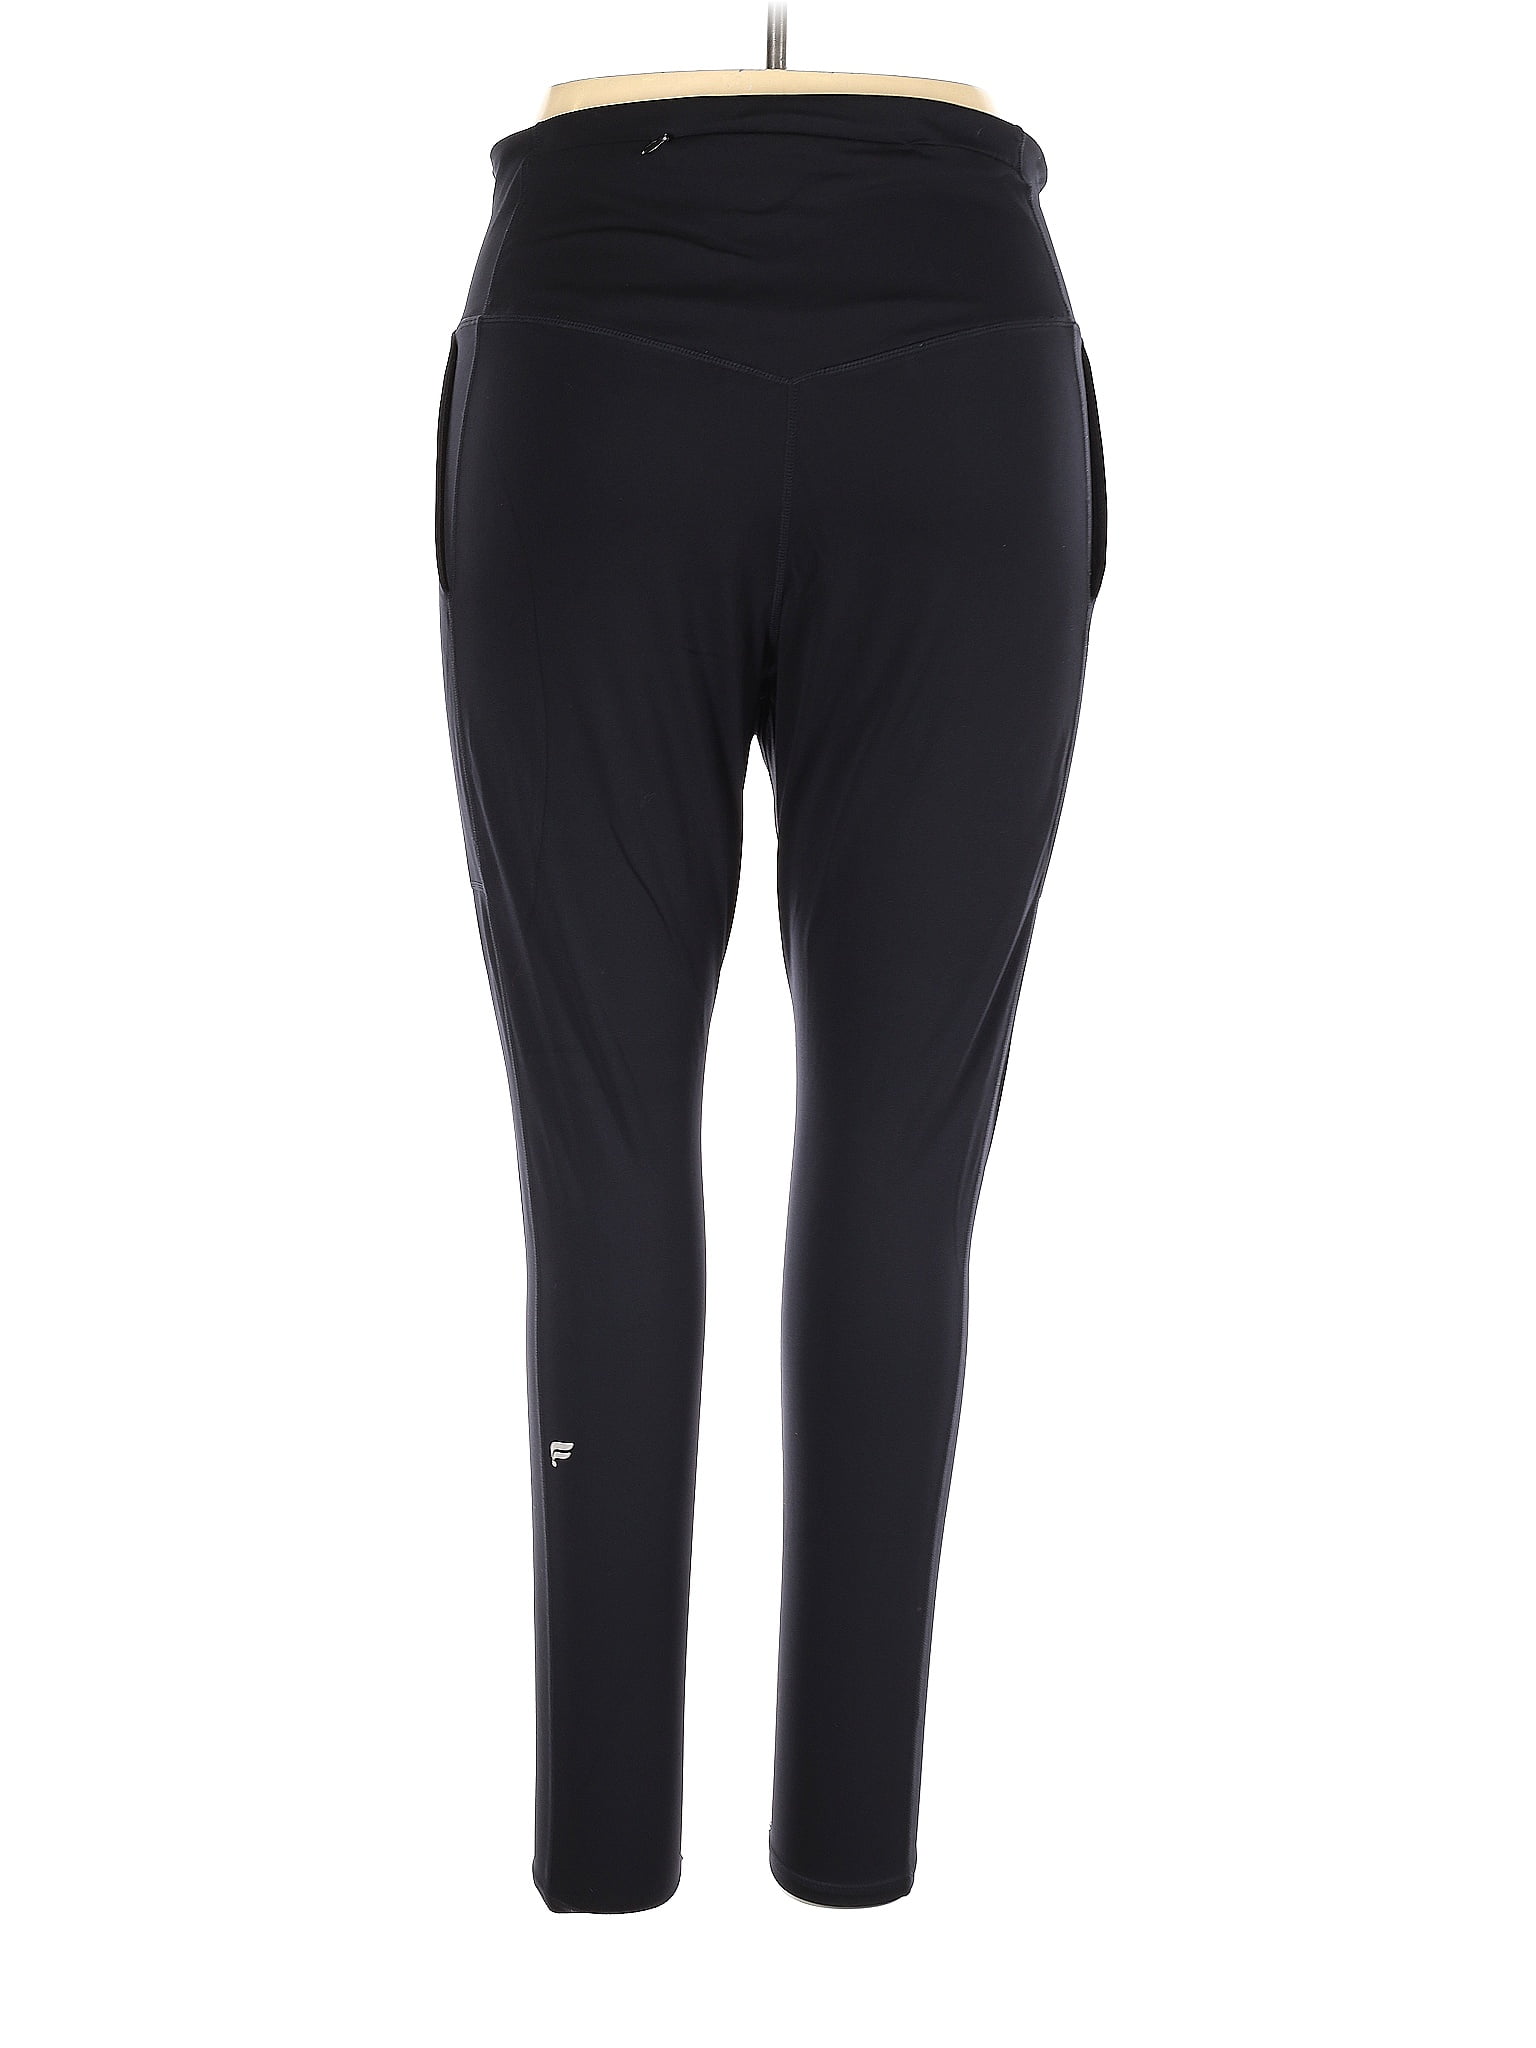 Motion 365 made by Fabletics Black Active Pants Size 2X (Plus